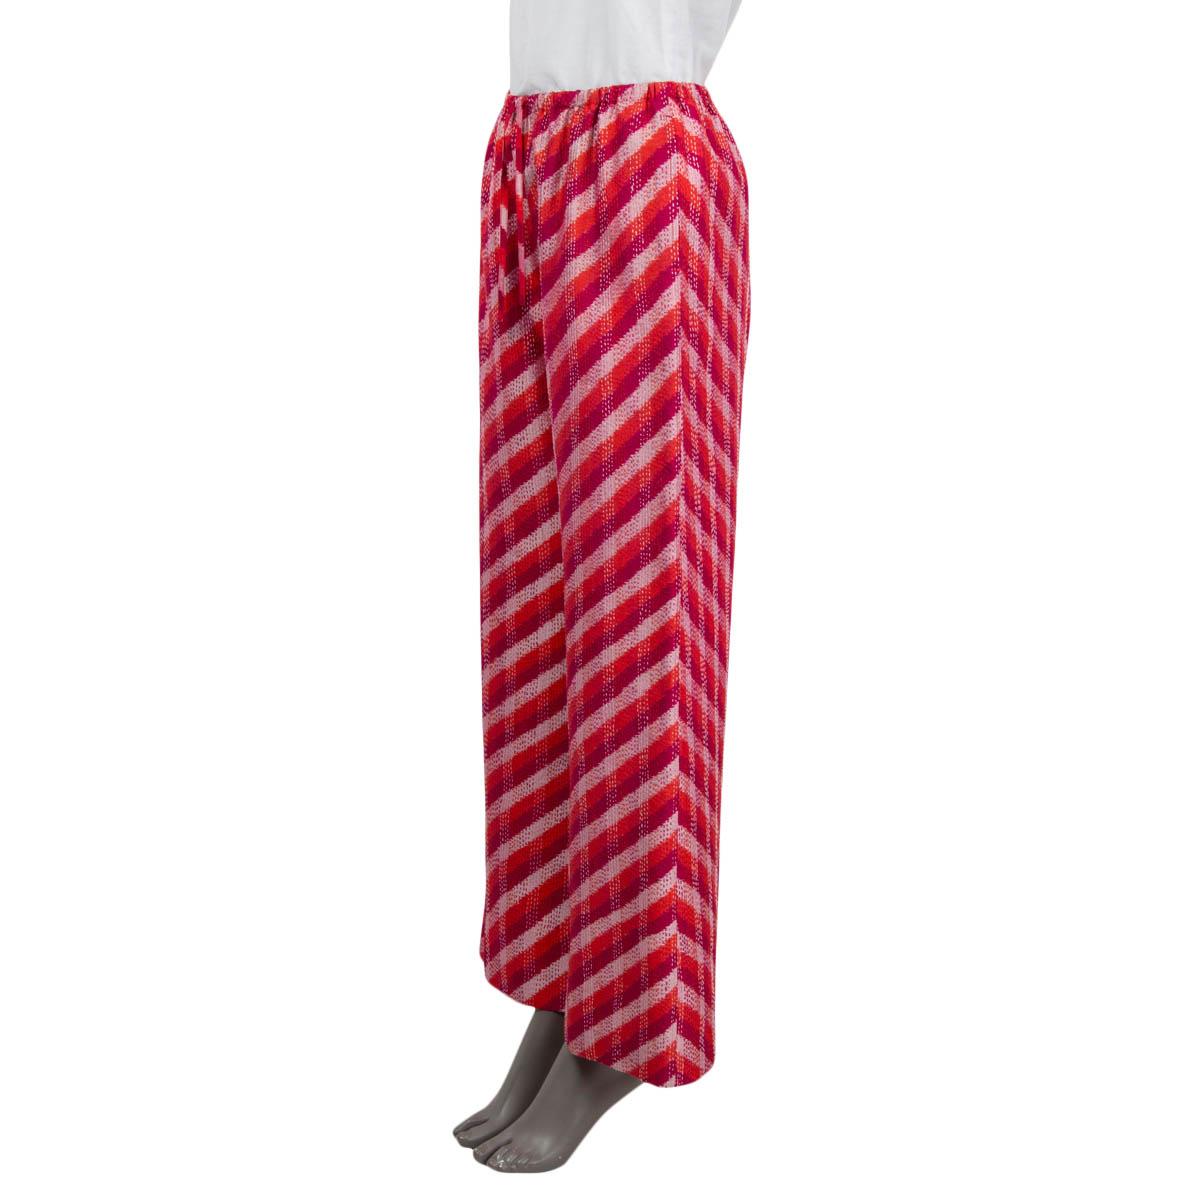 100% authentic Dries Van Noten 2022 'IKAT' wide leg pants in red, purple and dusty rose silk (100%). Feature a diagonal striped print and two side slit pockets. Open with a drawstring and have an elastic waistband. Pockets lined in red silk (100%).